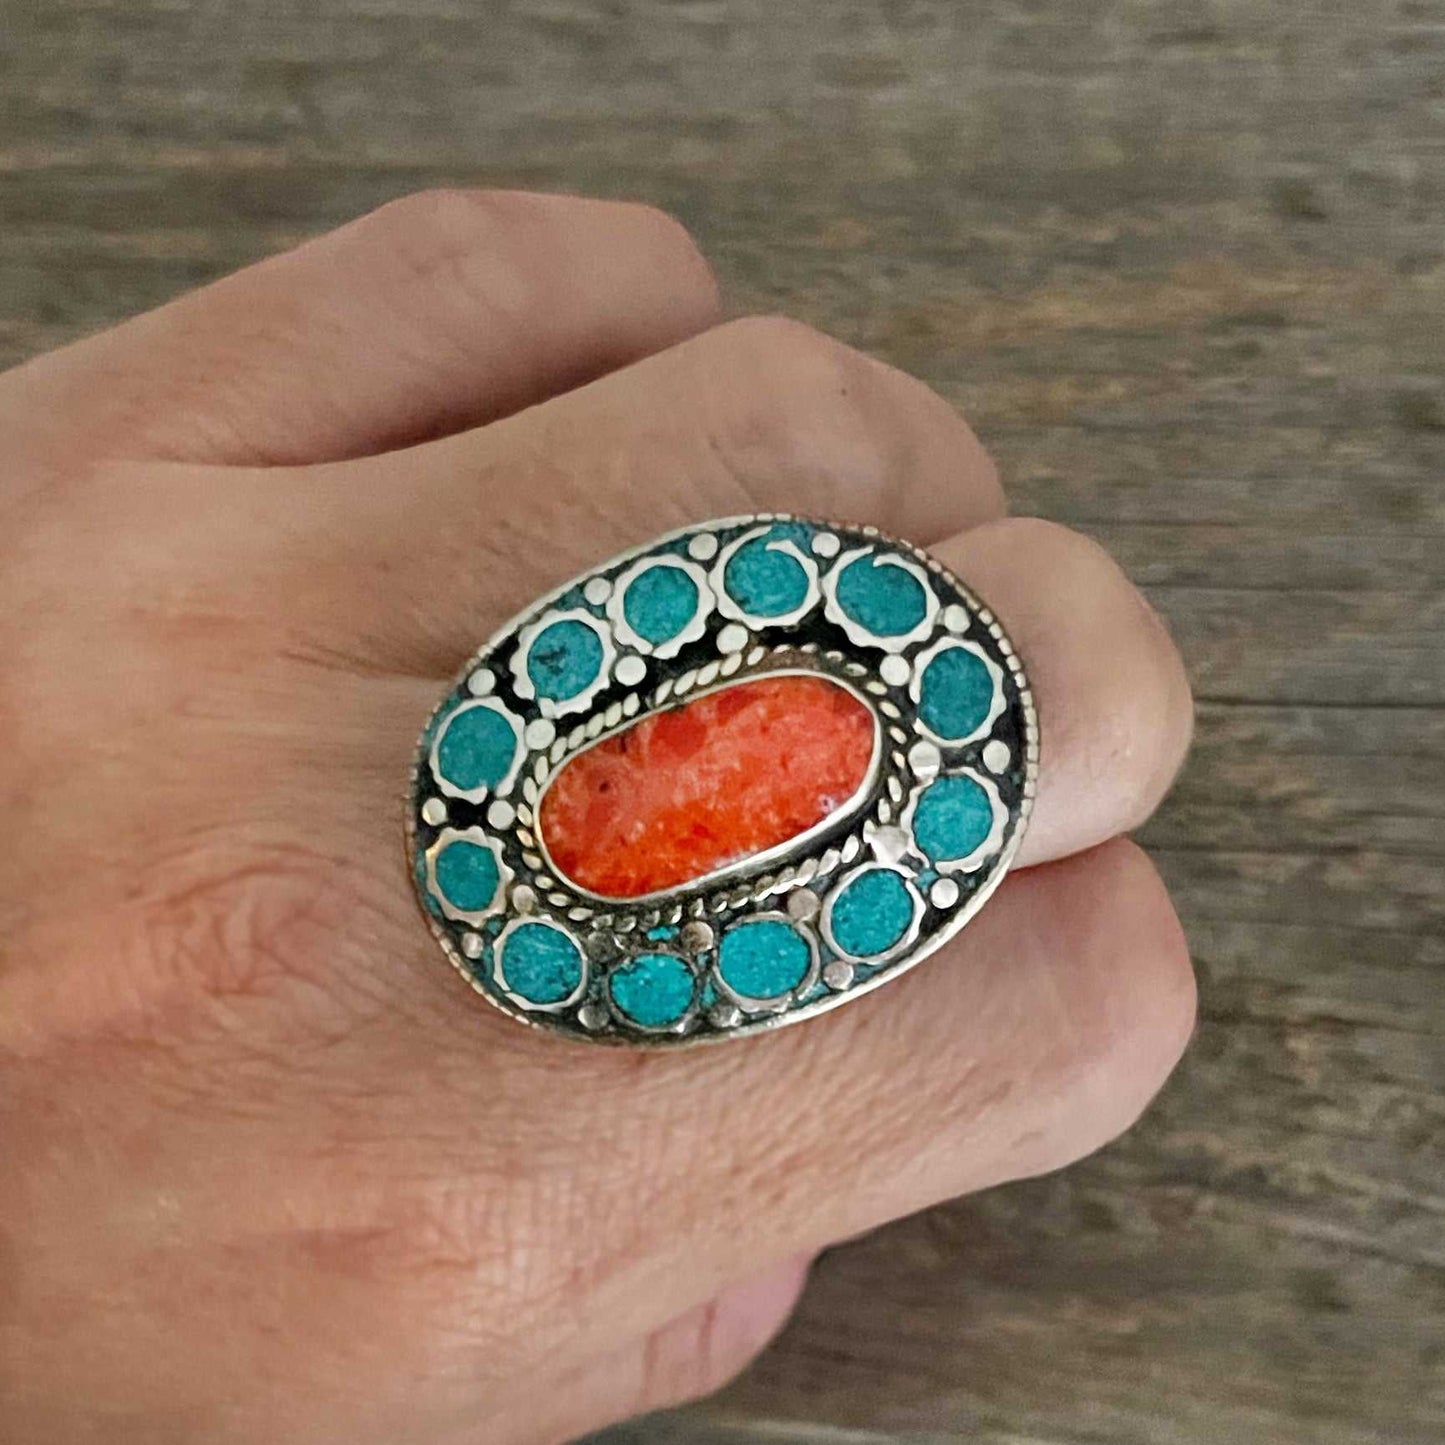 Big statement oval B Tibetan ring with Turquoise, Coral and Lapis Lazuli gemstone